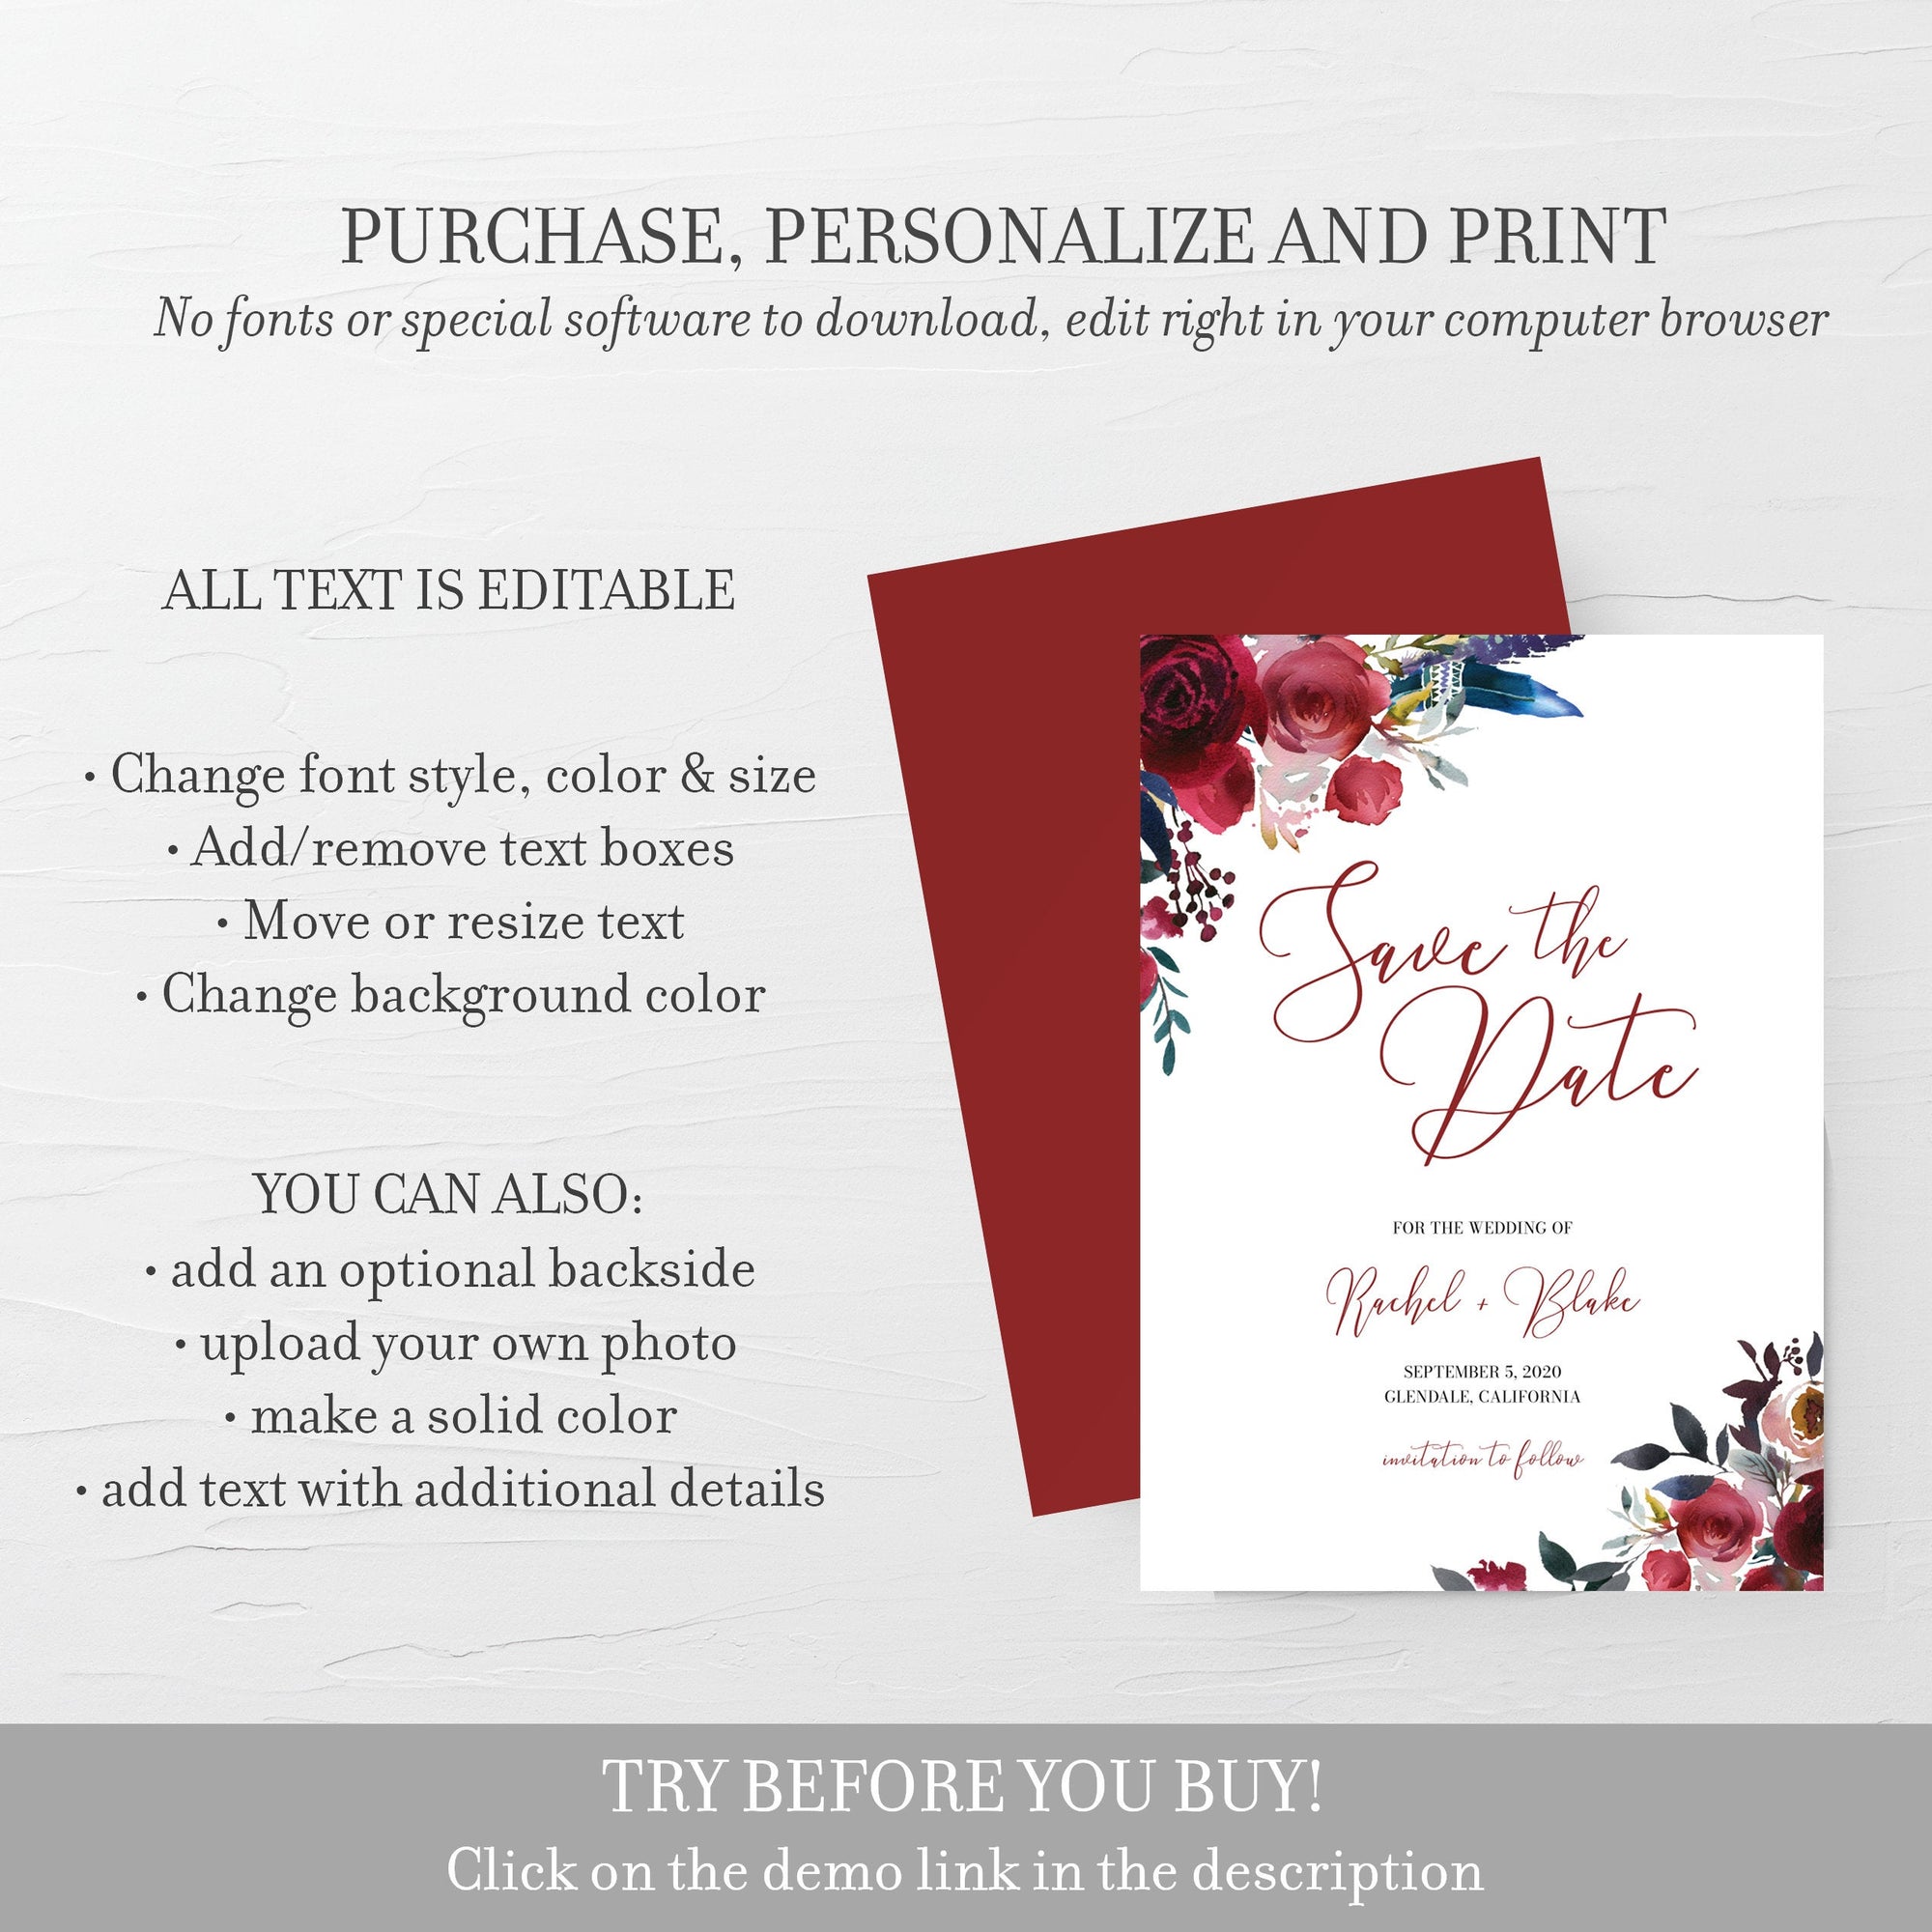 Buy Save the Date Template, Instant Download, Save the Date Cards,  Printable Save the Date, Burgundy Save the Day Invites DIY, Templett, C6  Online in India 